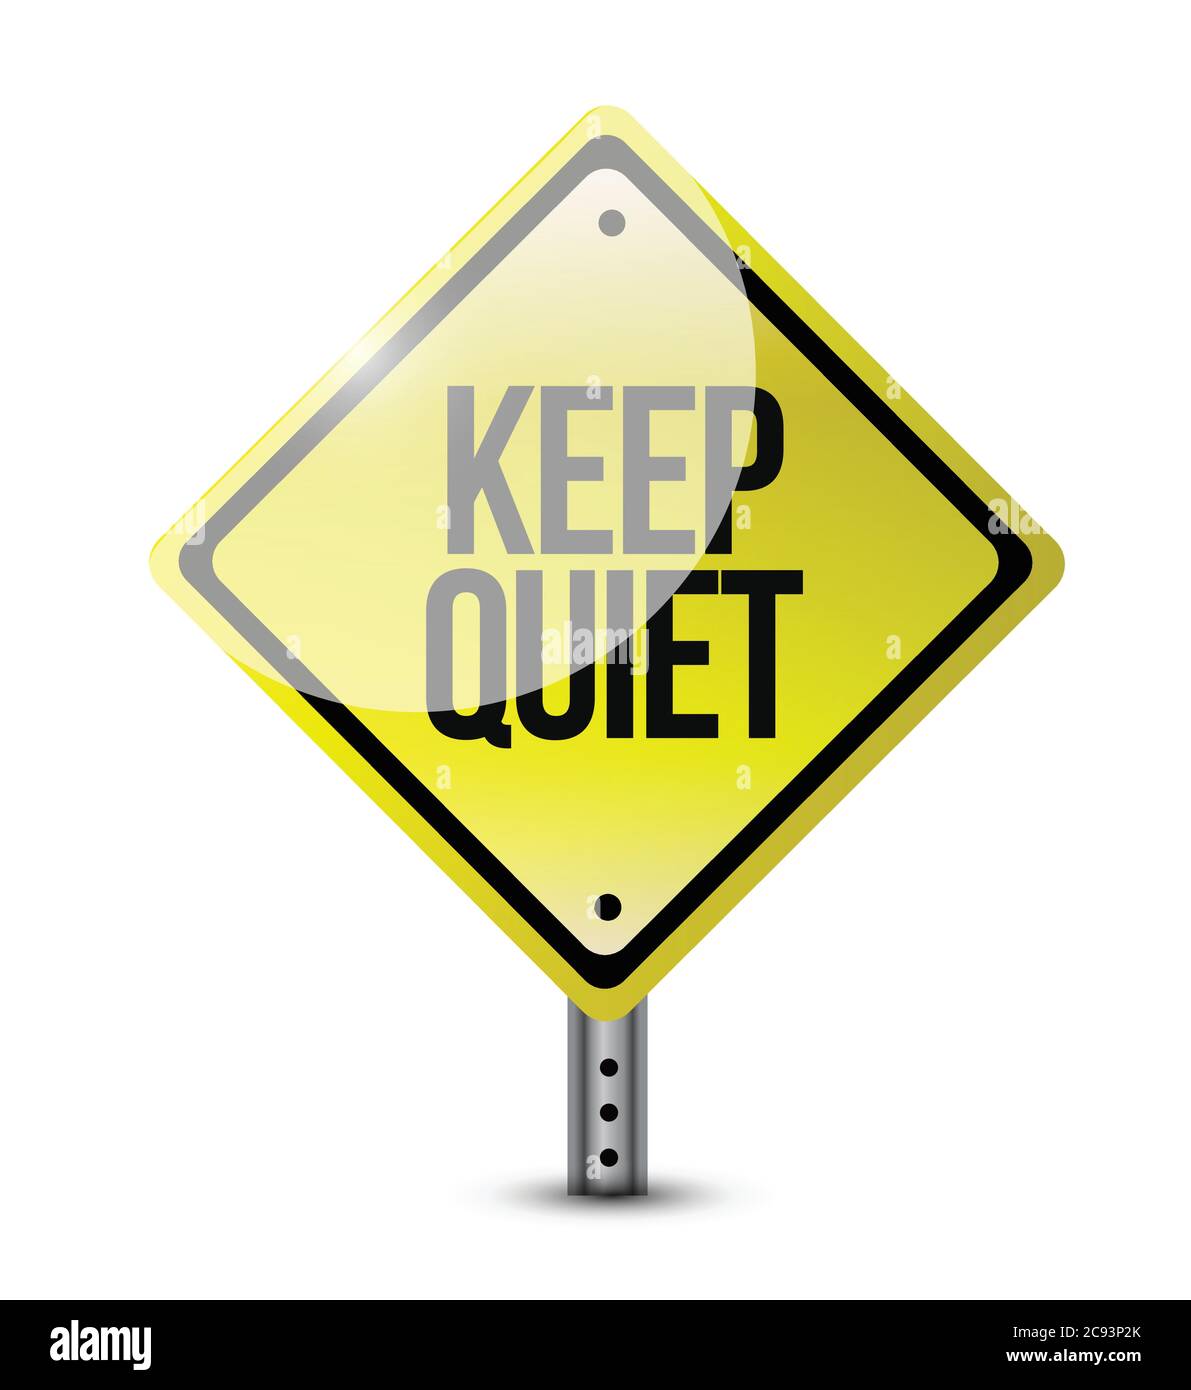 Keep quiet road sign illustration design over white Stock Vector